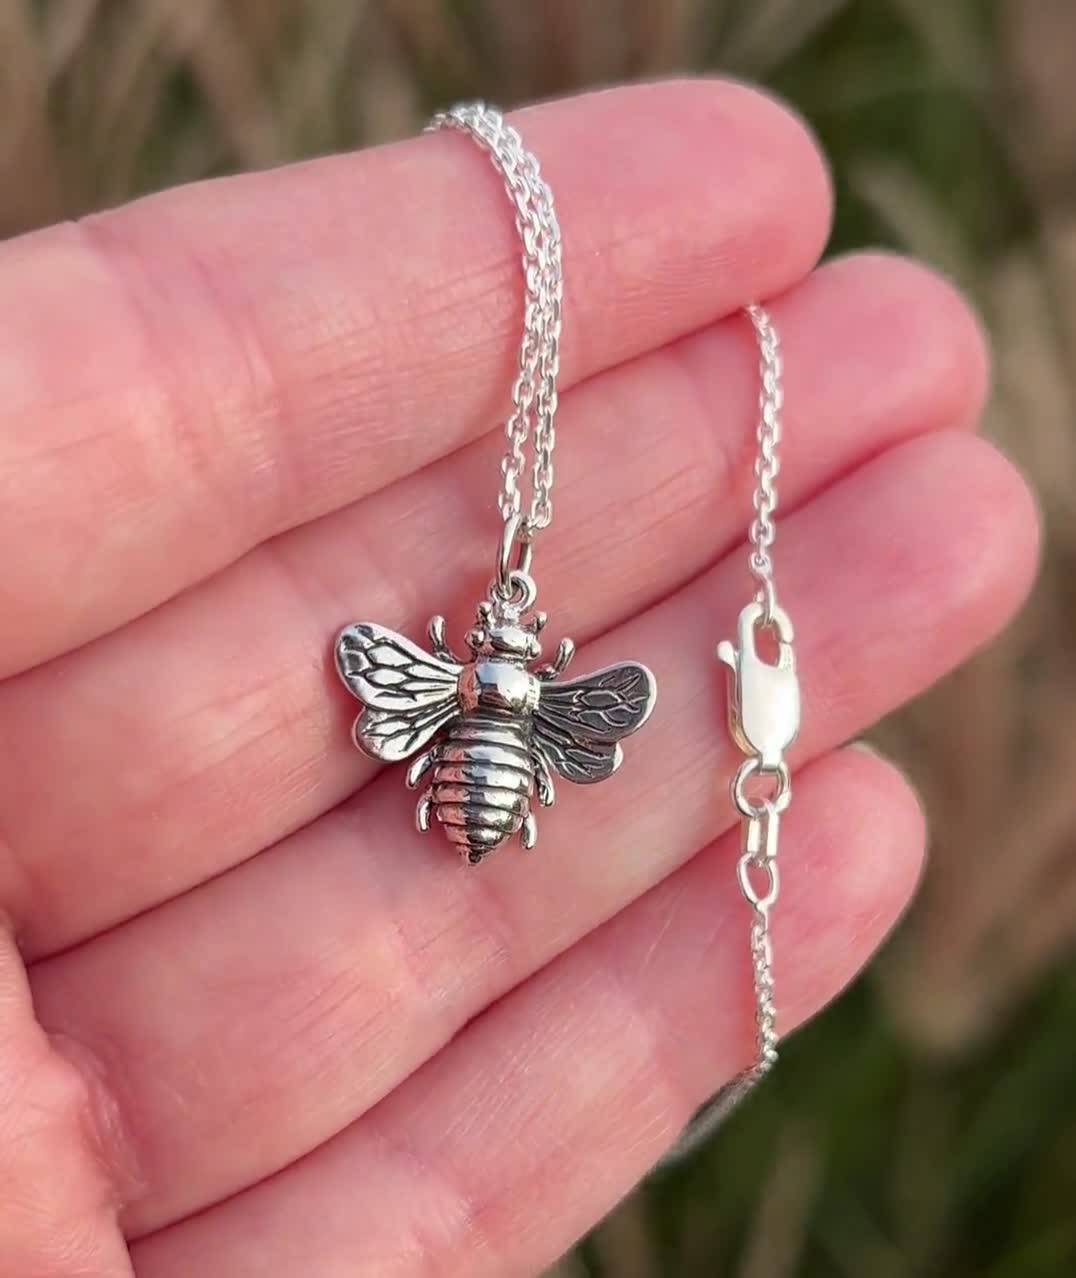 PELOVNY Bee Necklace 925 Sterling Silver Bee Gifts with Sunflower Necklaces  Bumble Bee Nature Jewelry Gift for Women Girls Birthday Christmas  Graduation : Amazon.co.uk: Fashion